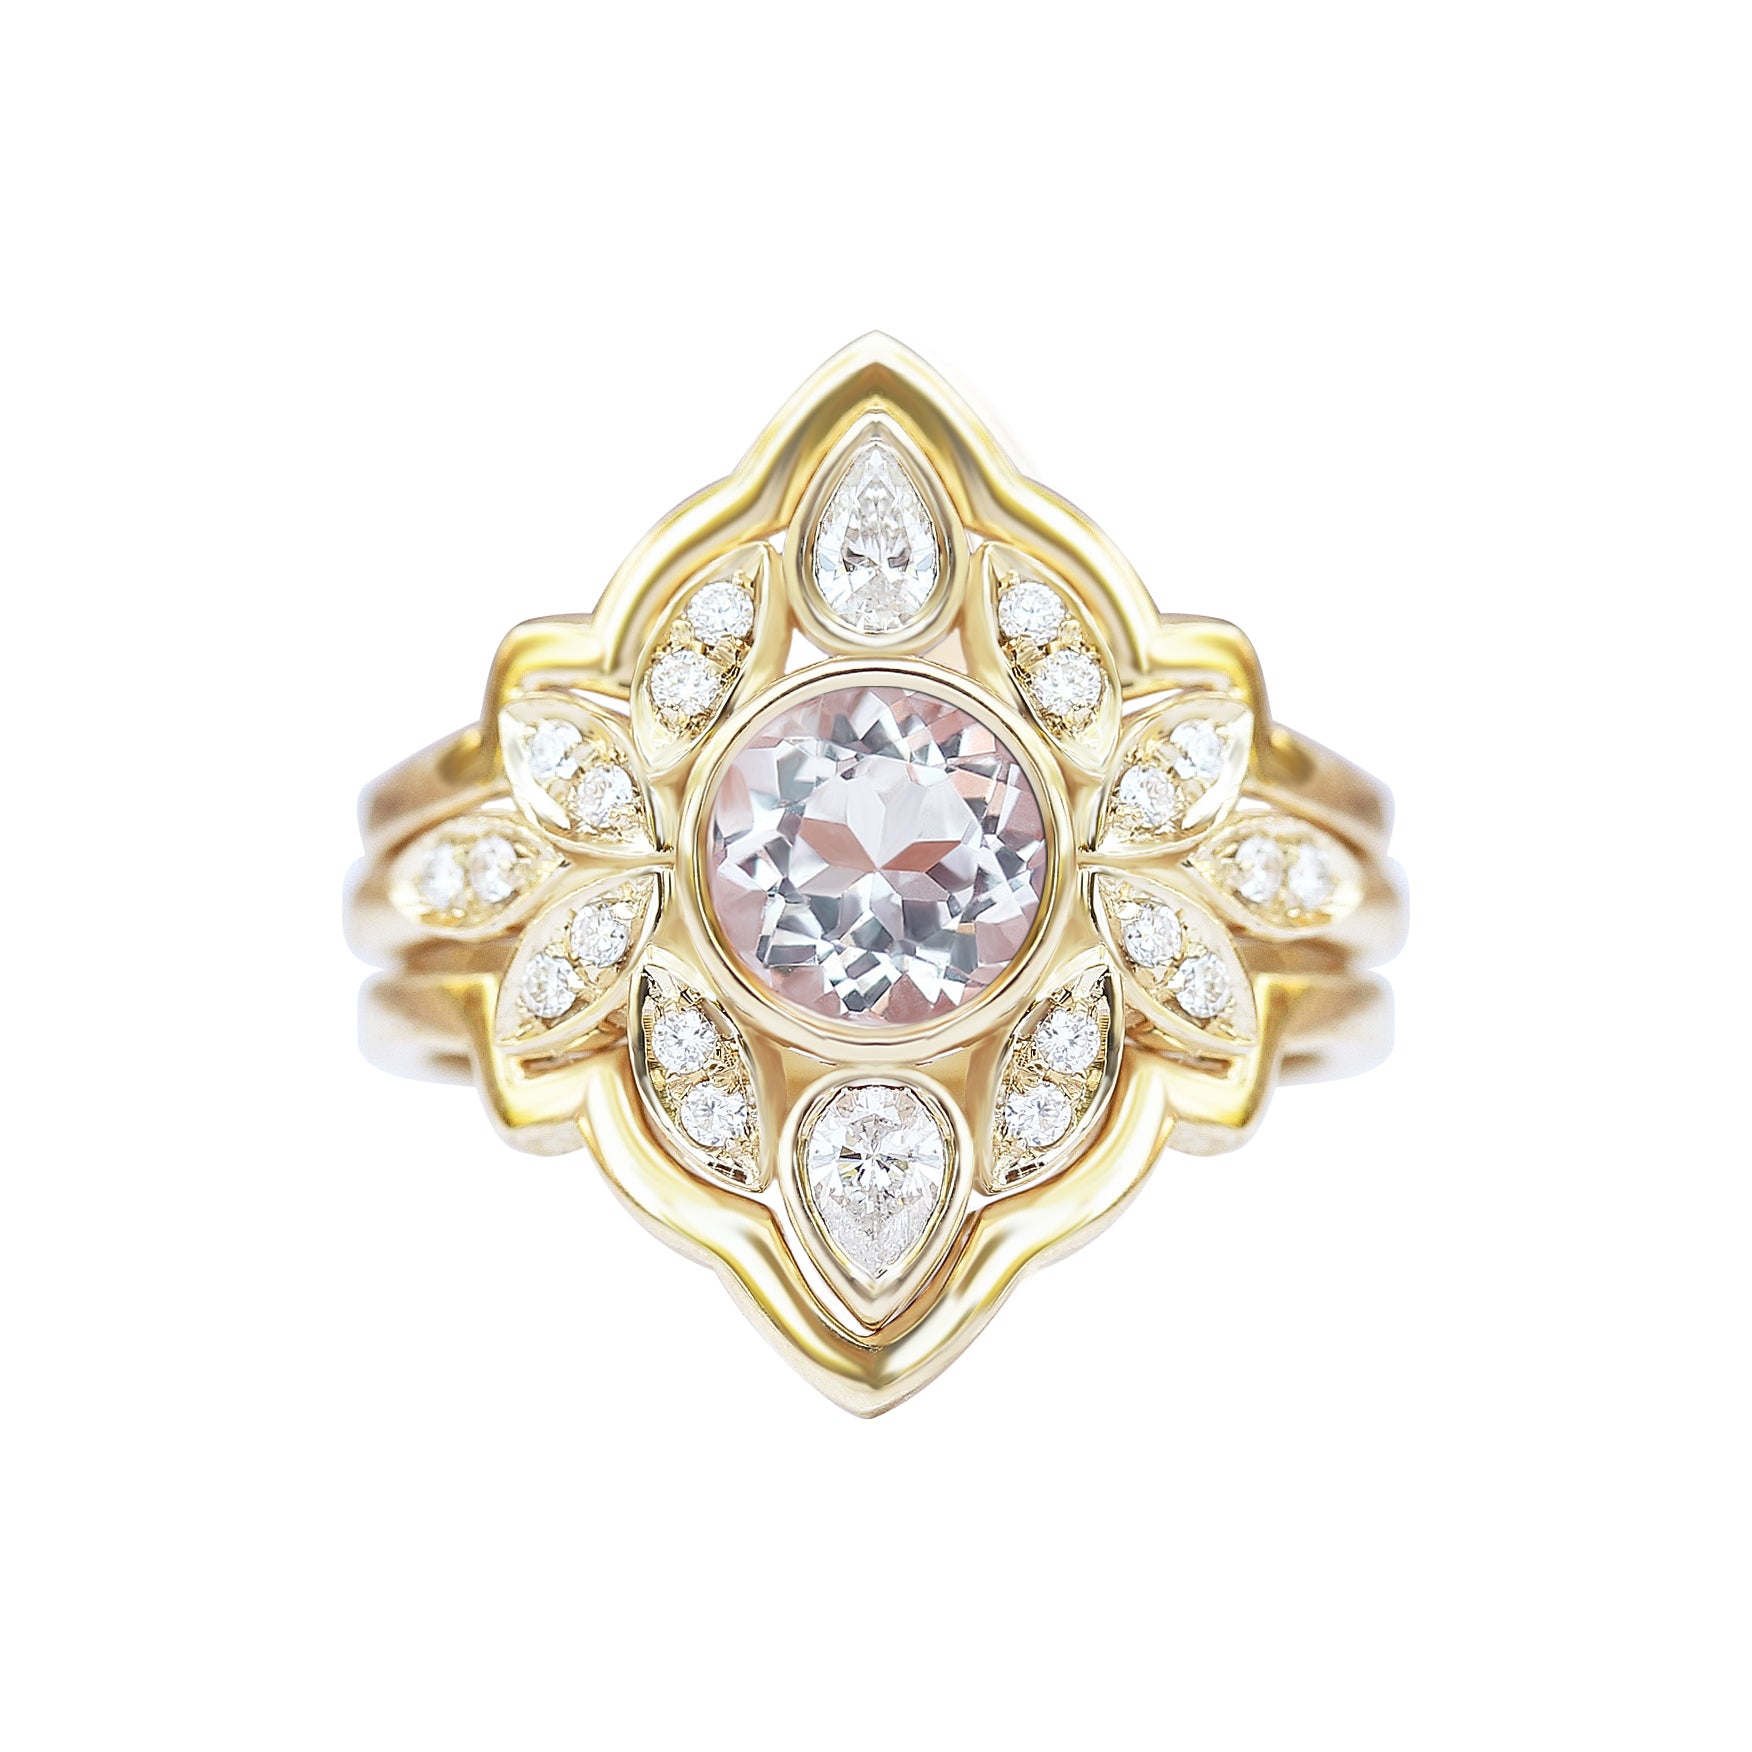 Morganite & Diamonds Flower Engagement Ring With Pave Diamond Rings Guard- Lily #5 ♥